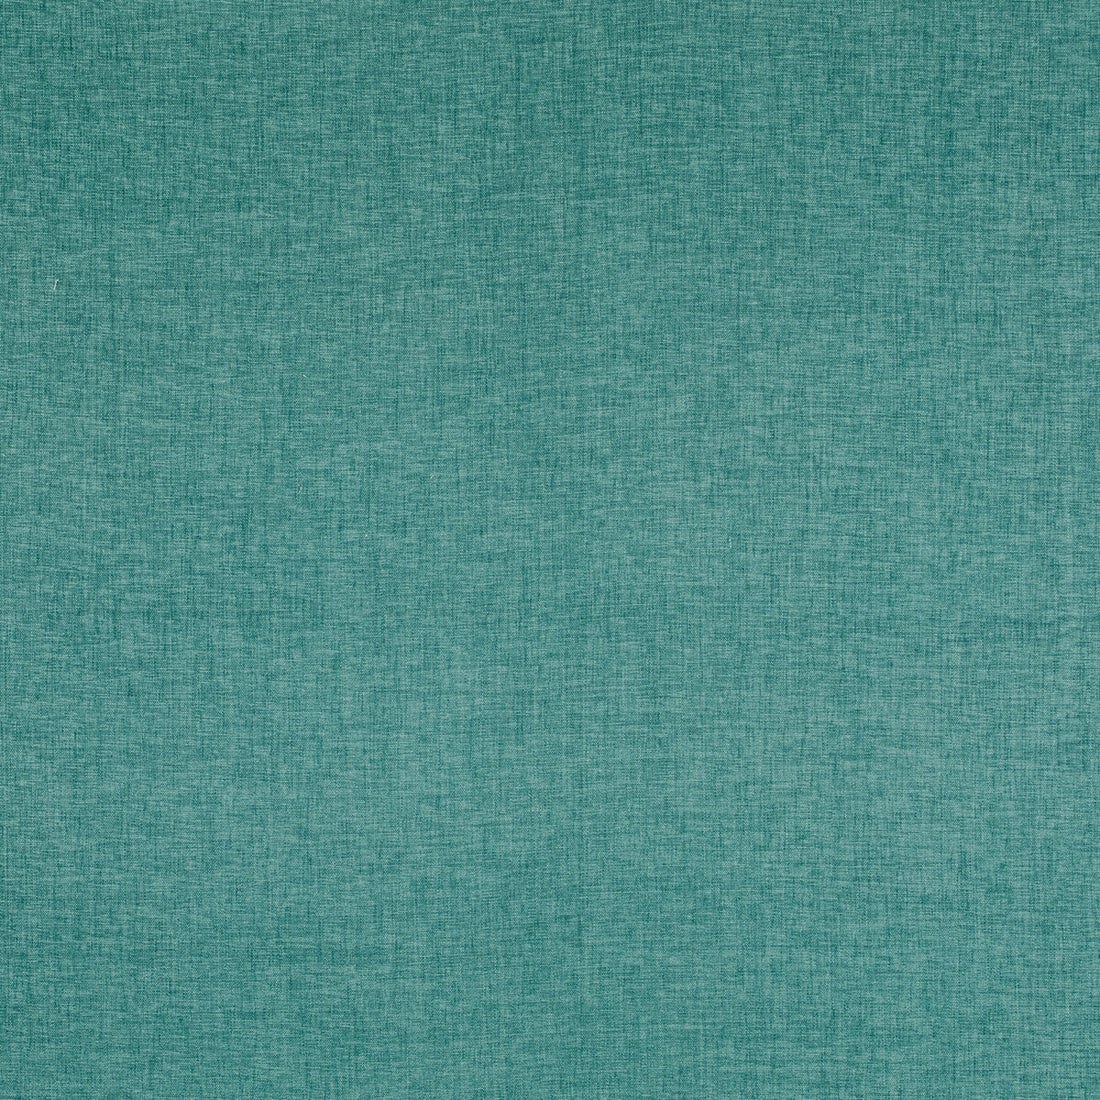 Kravet Smart fabric in 36095-13 color - pattern 36095.13.0 - by Kravet Smart in the Eco-Friendly Chenille collection